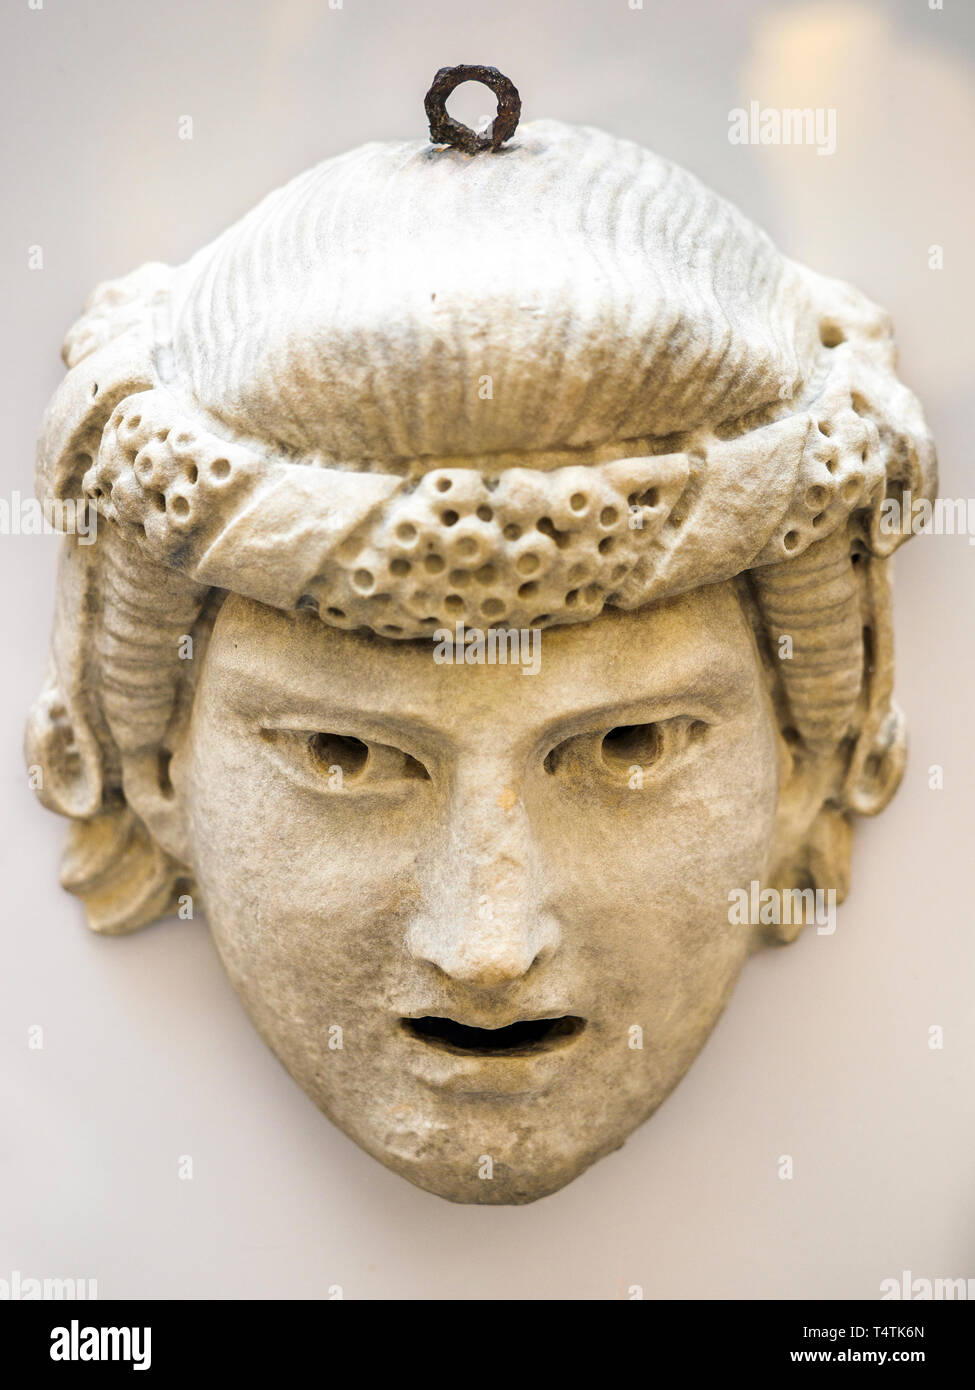 Stone dramatic mask Roman 1st- 2nd century AD Stone masks were made to decorate both public and private spaces and for dedication in shrines. Stock Photo